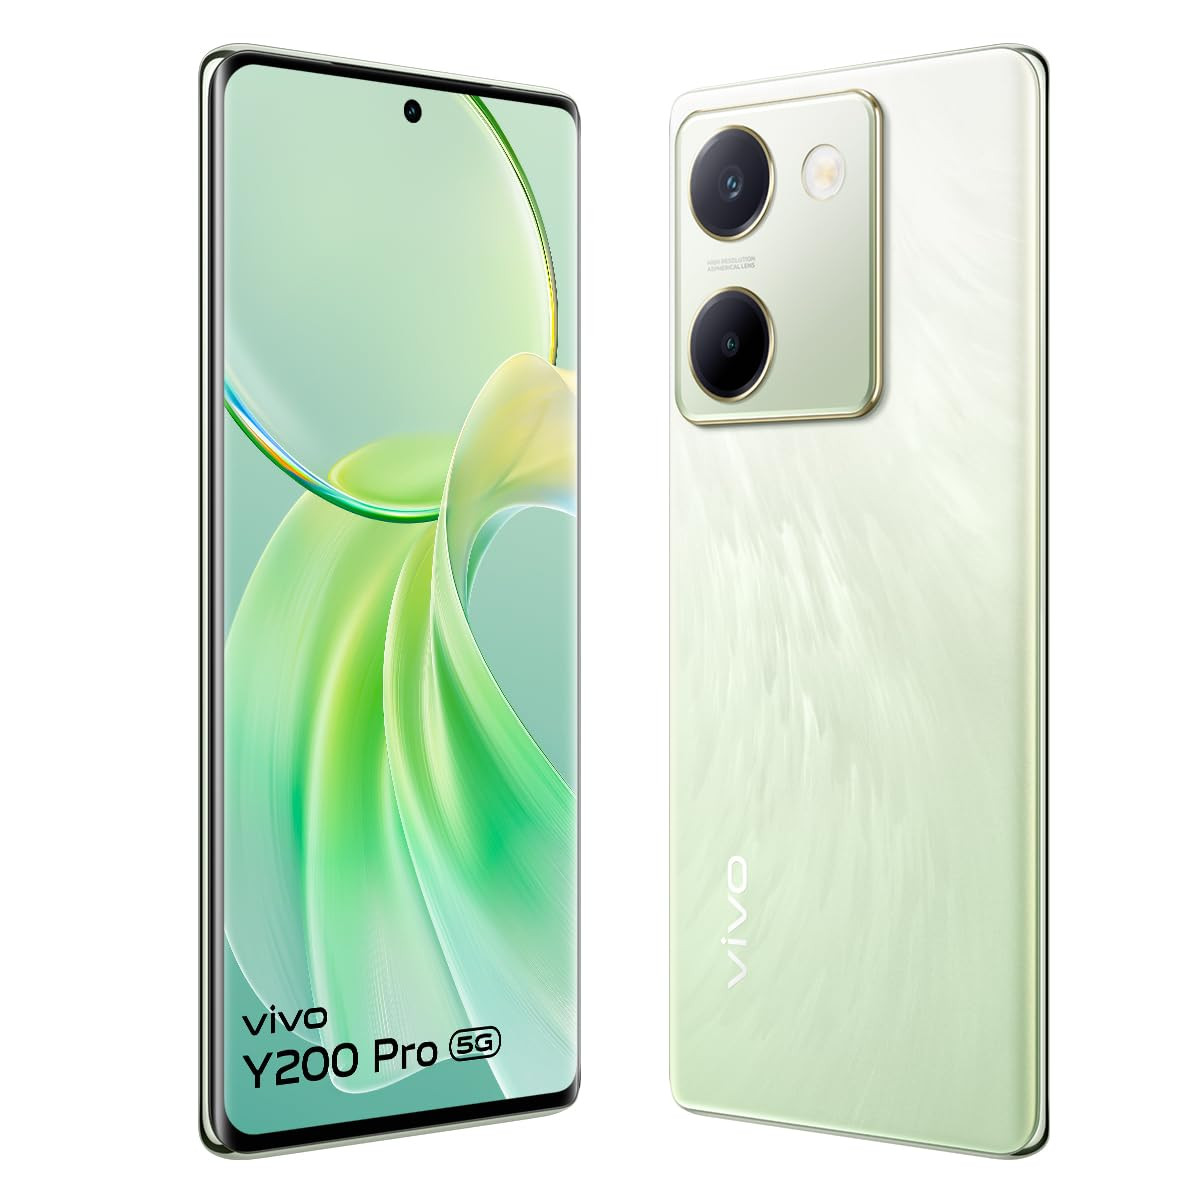 vivo Y200 Pro 5G Silk Green 8GB RAM 128GB Storage with No Cost EMIAdditional Exchange Offers  3D Curved AMOLED Display